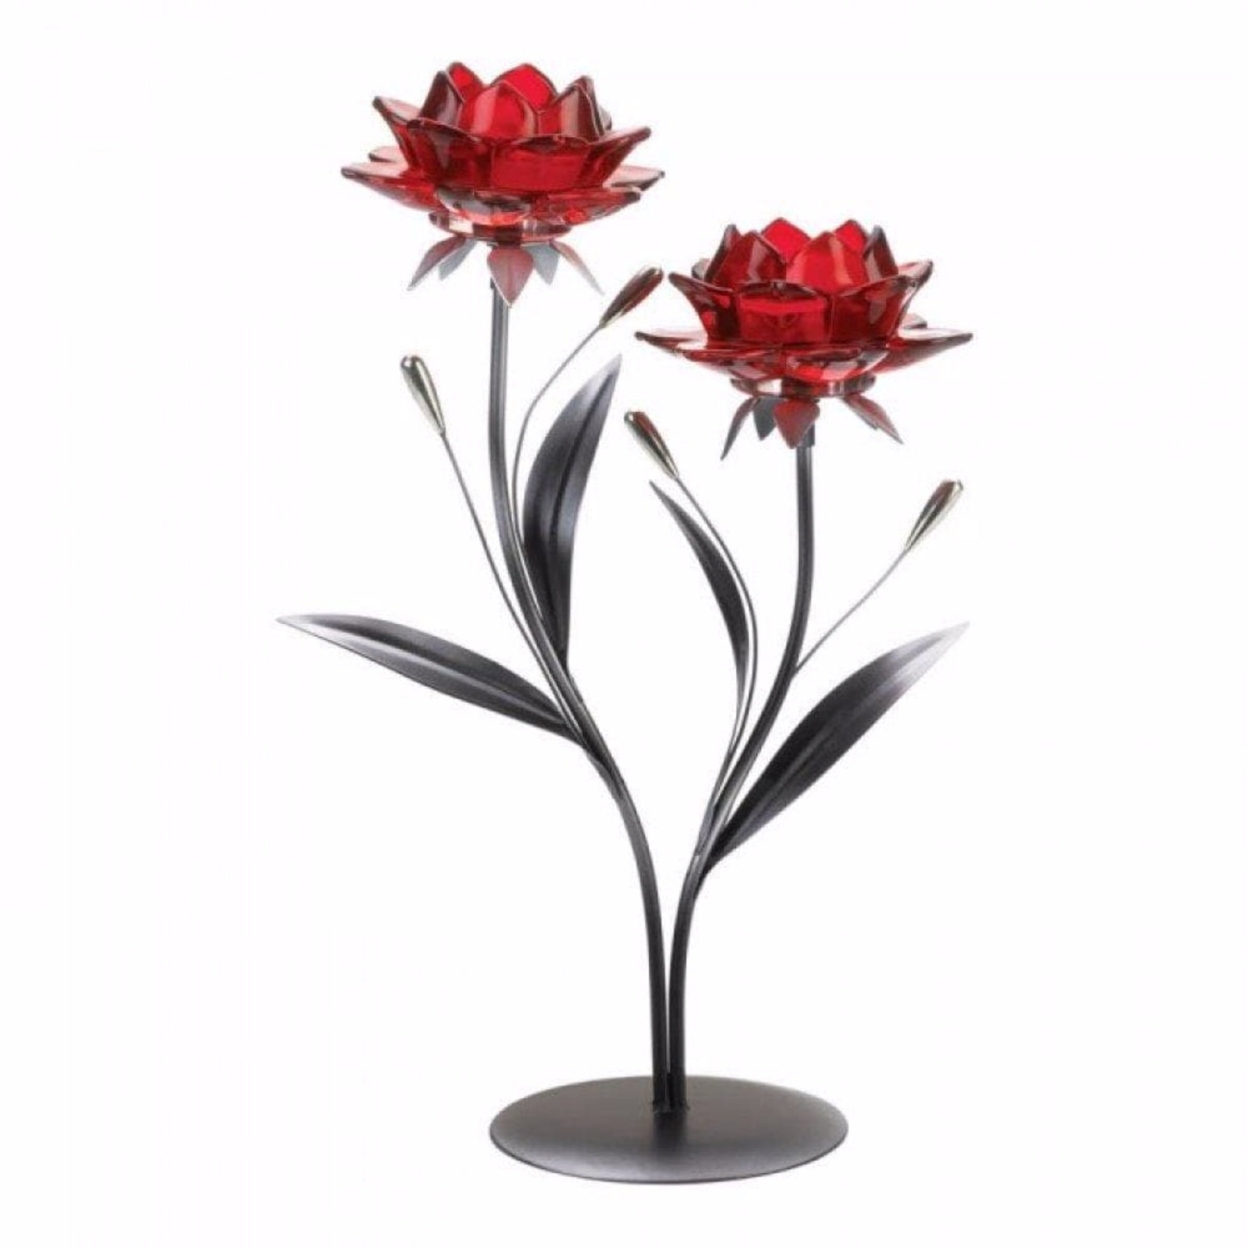 Romantic Red Flowers Candleholder - 2